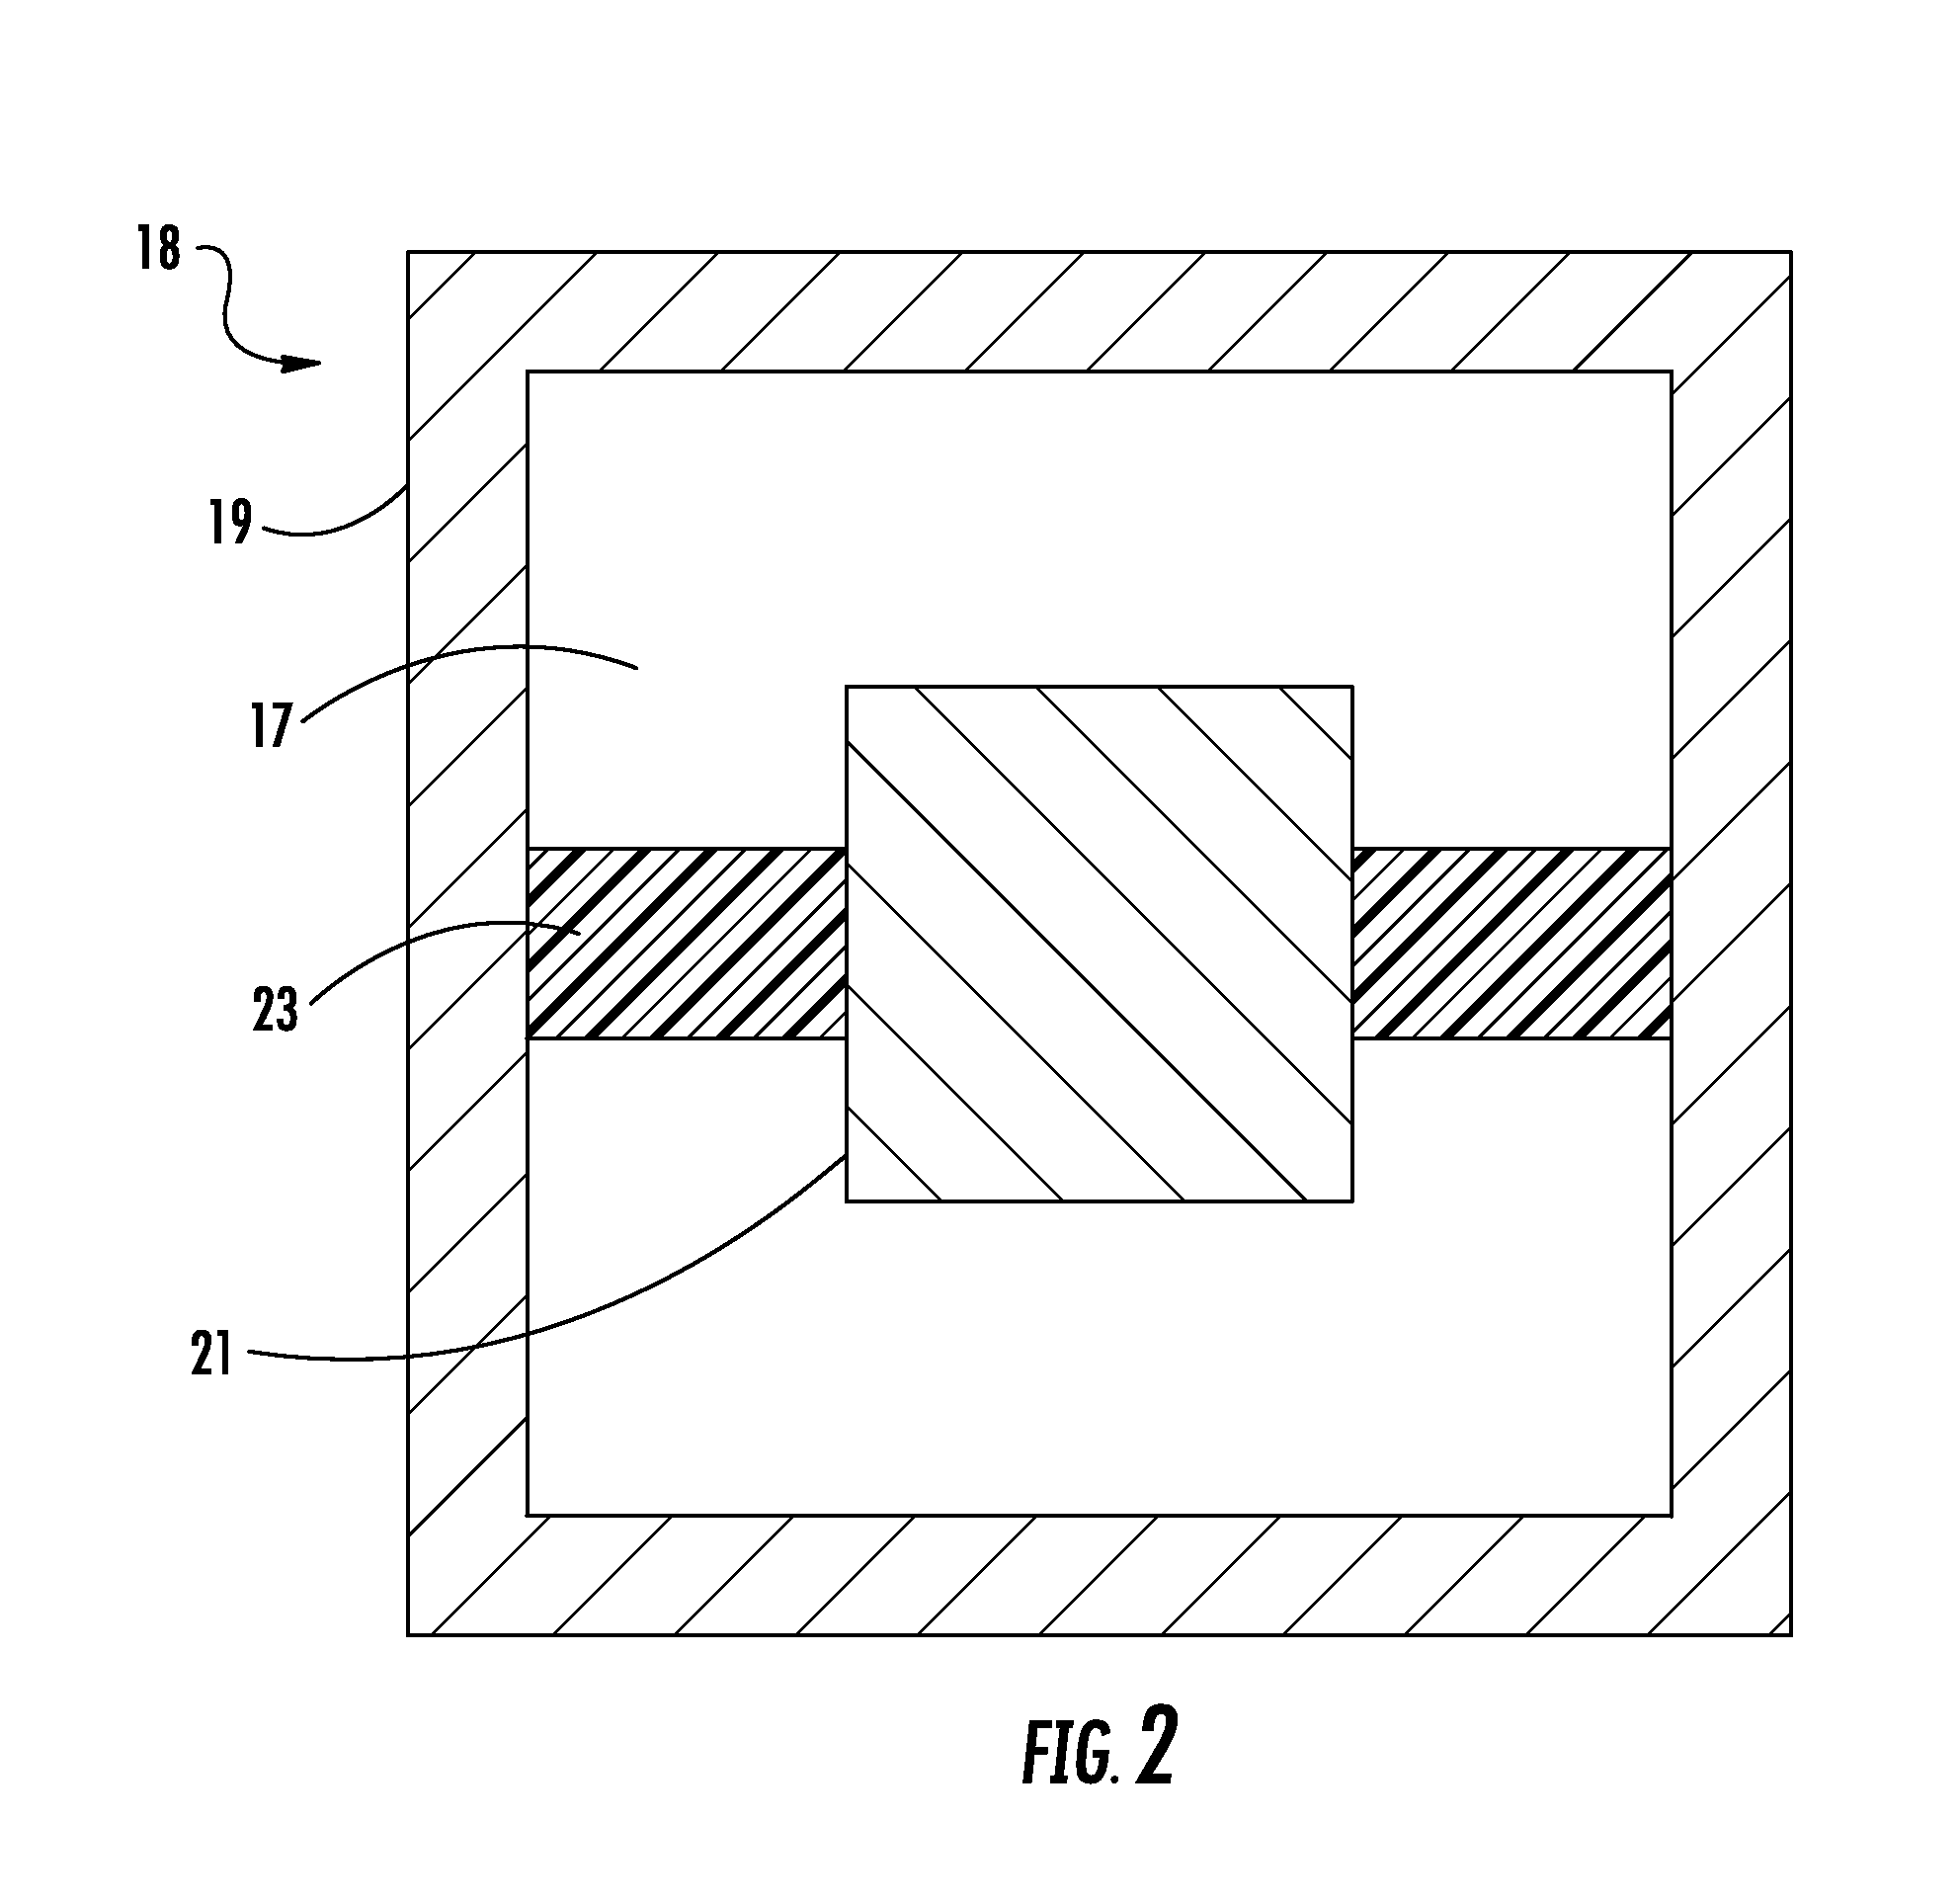 Phased array antenna module and method of making same